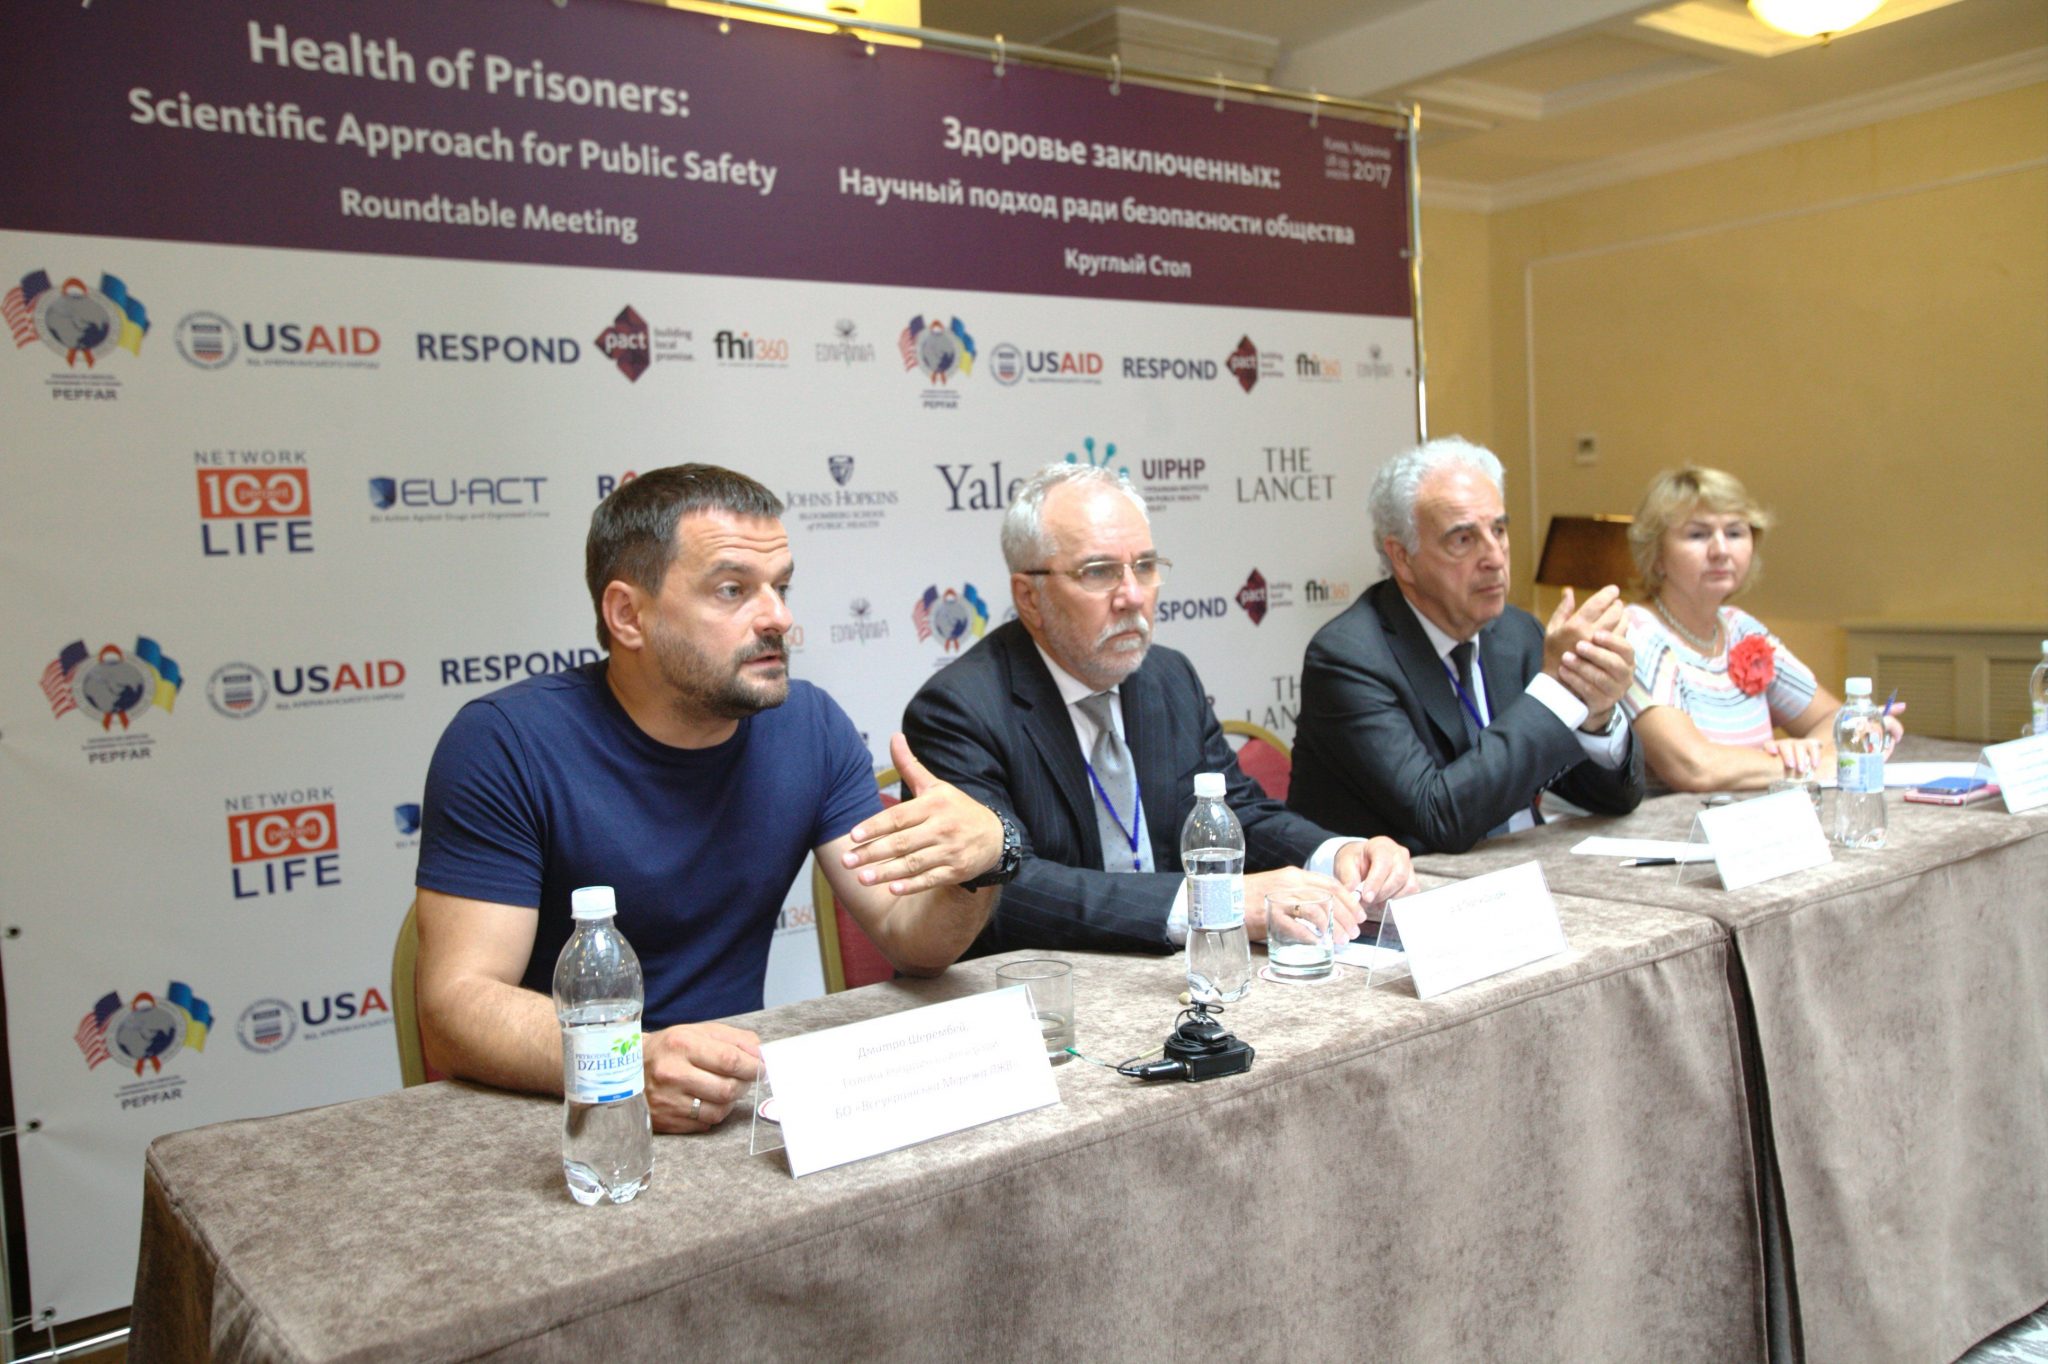 Round table “How does the health of prisoners affect the health of all Ukrainians?” Took place in Kyiv.